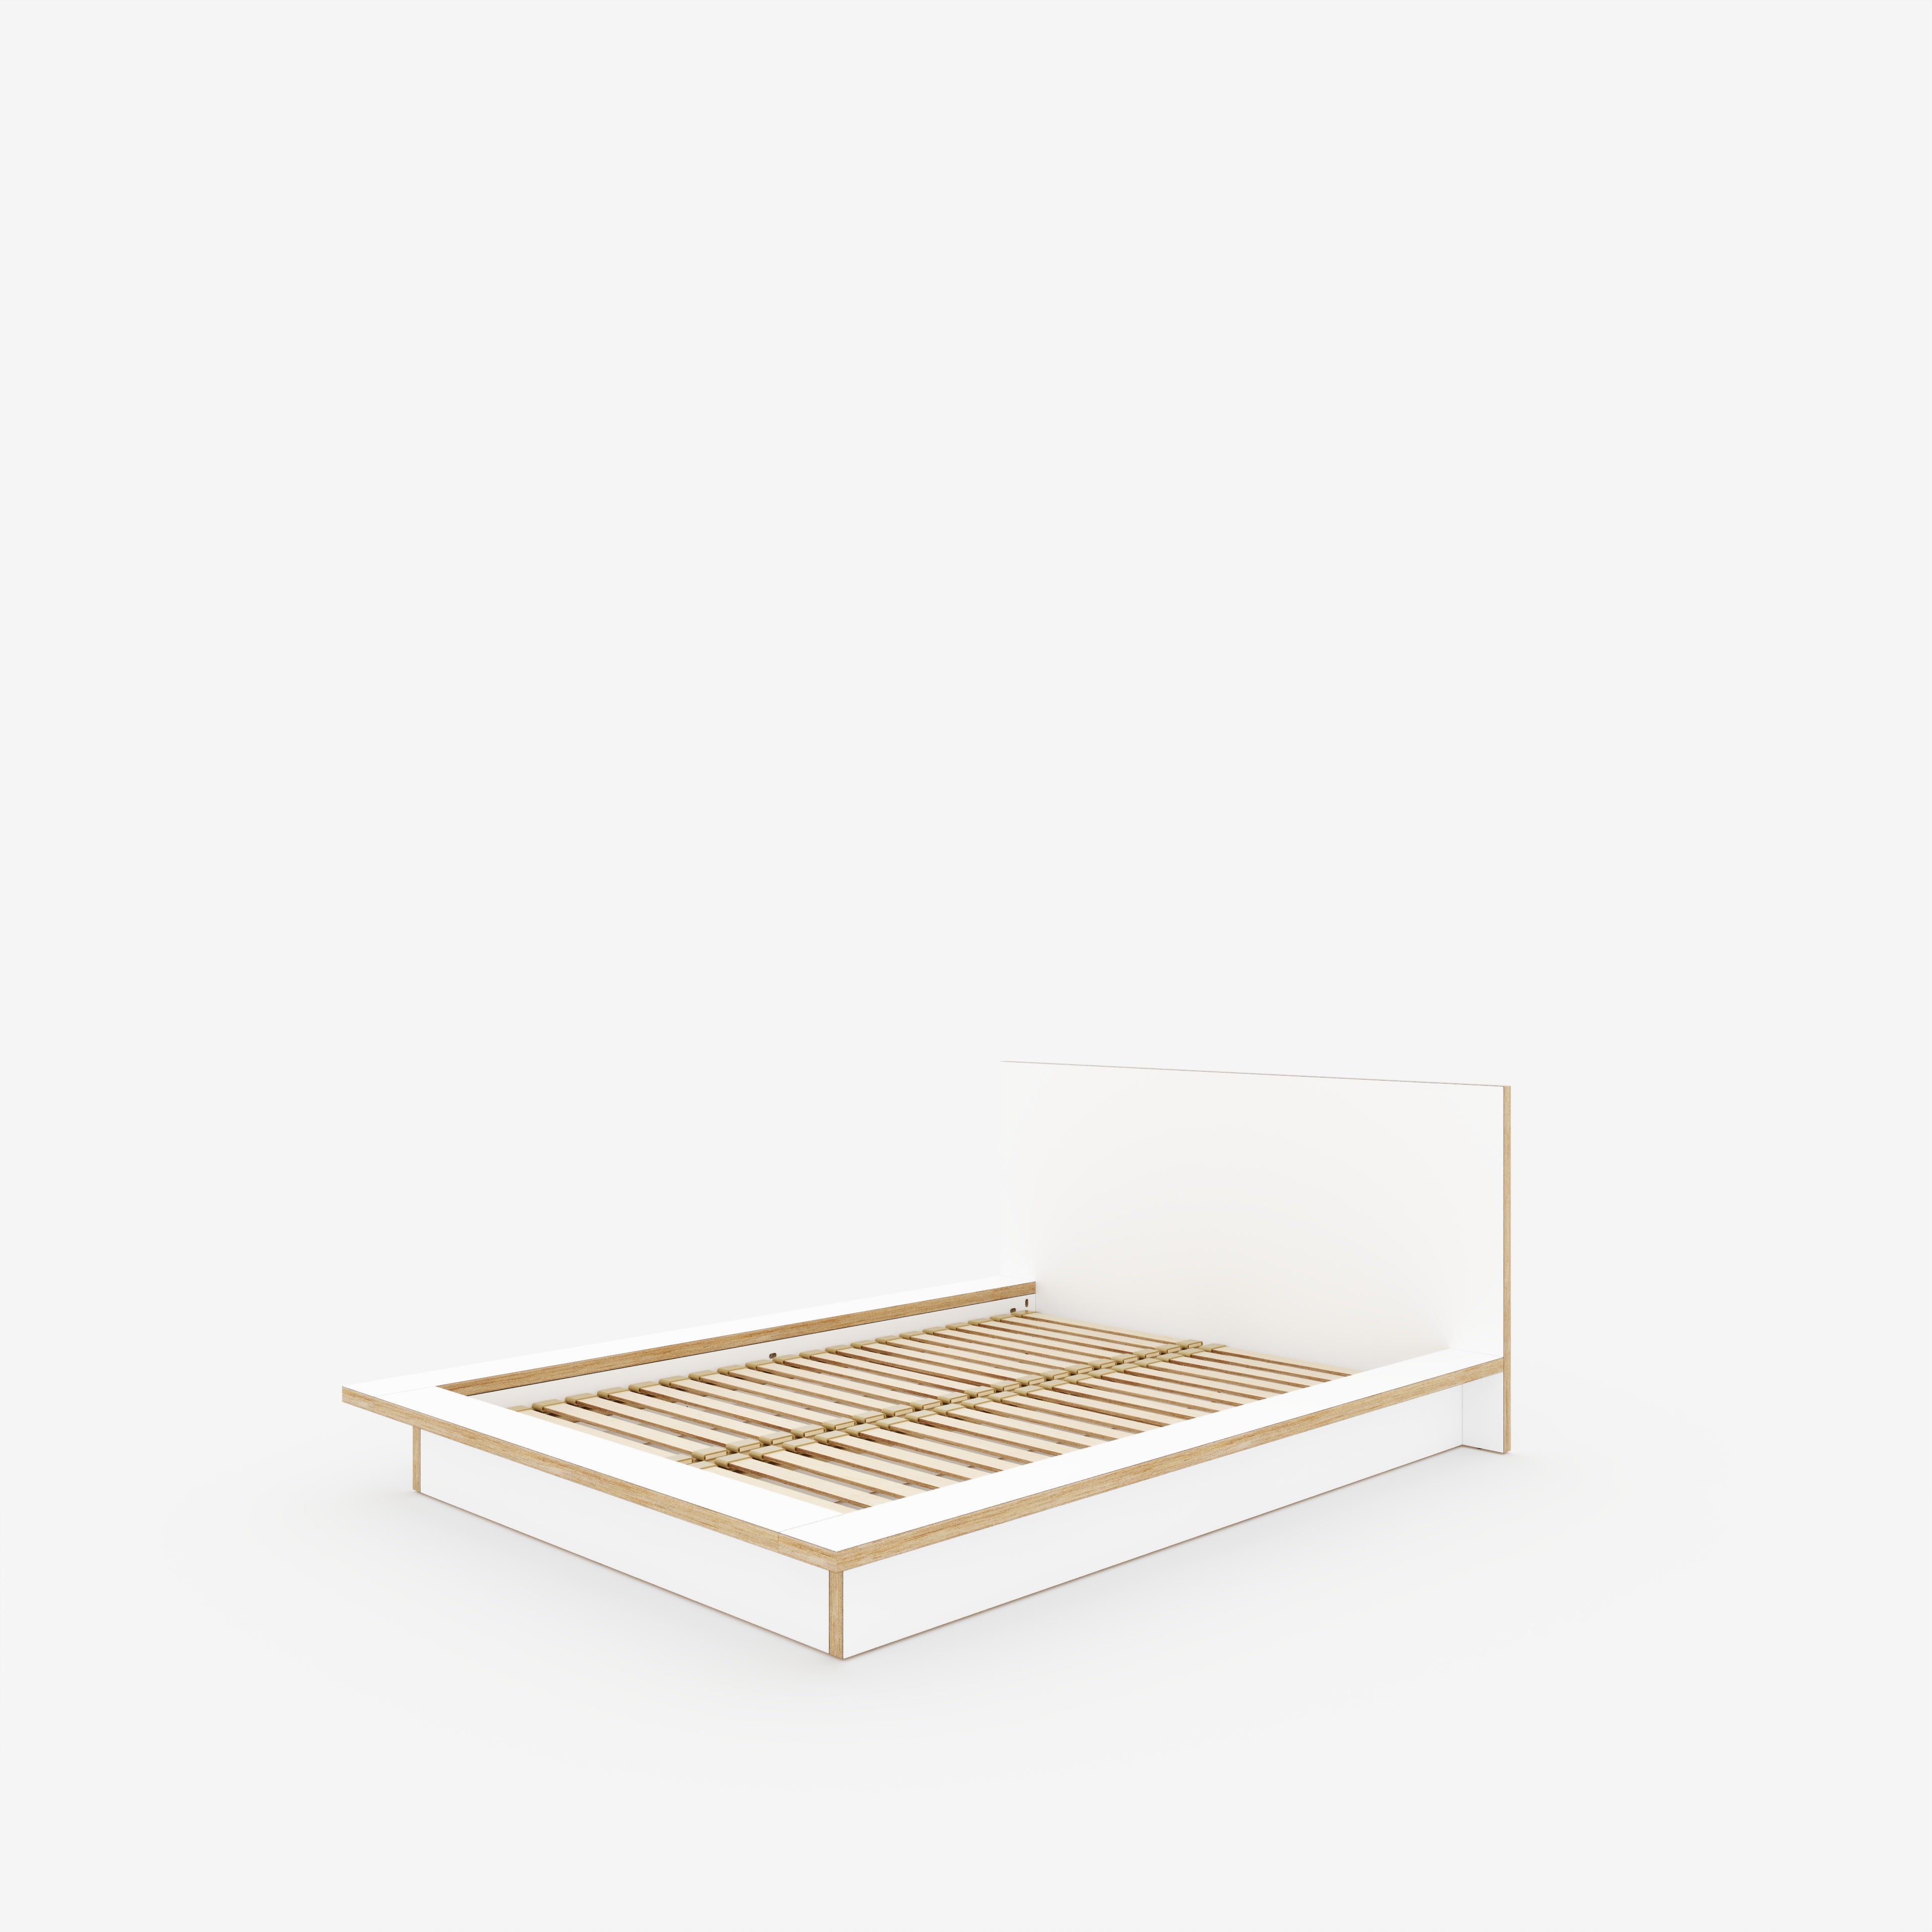 Plywood Platform Bed - Plywood Formica White - European Double 1400(w) x 2000(d) Low